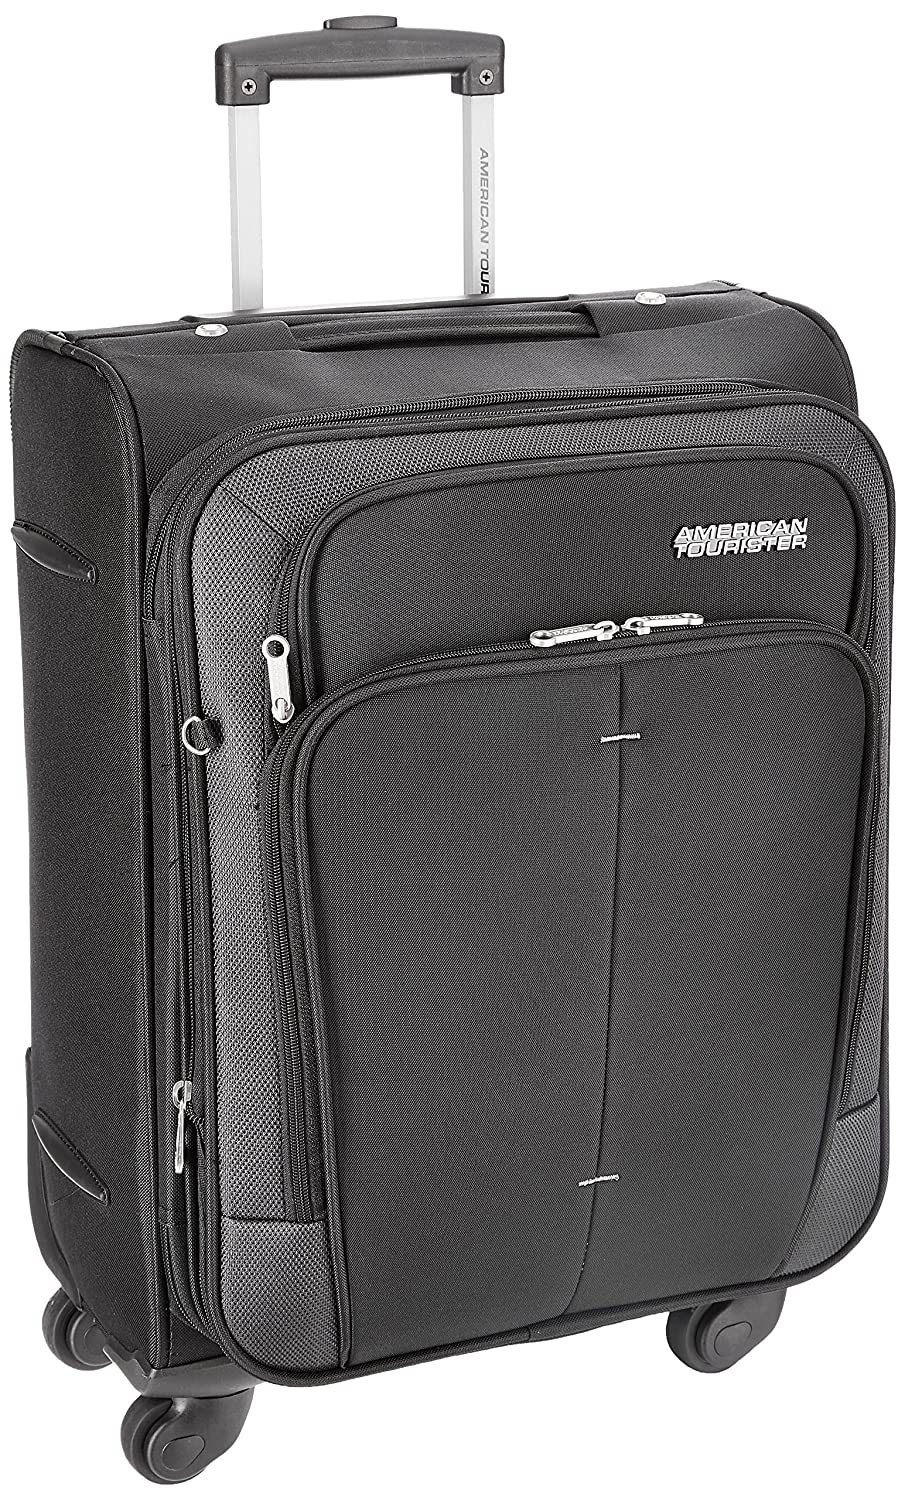 American Tourister Crete Polyester 55 cm Black Softsided Carry On